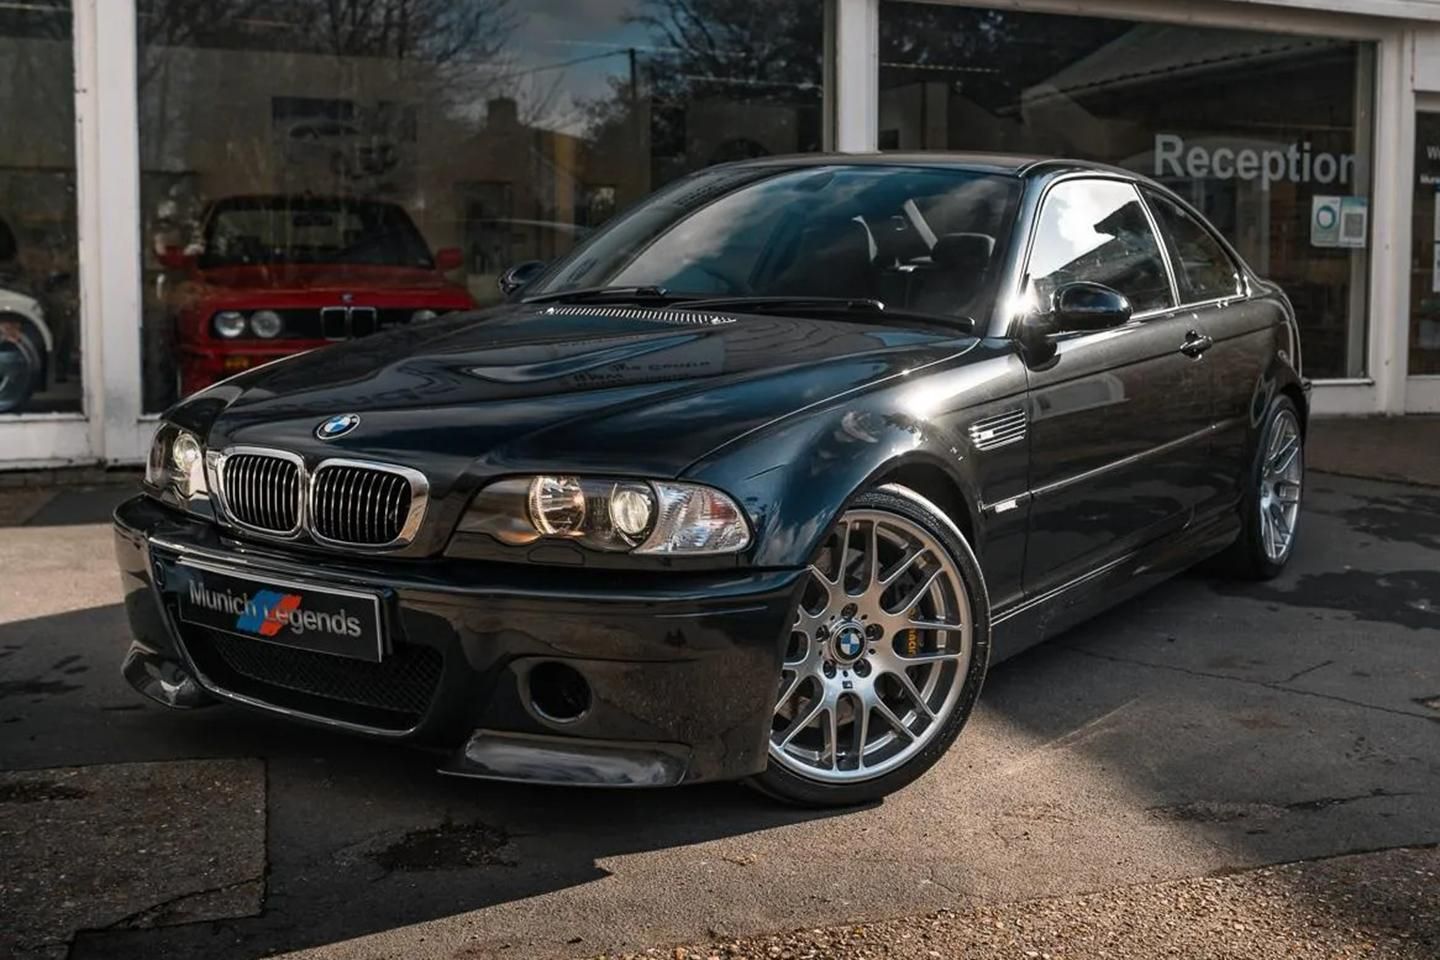 These are the 50 best ever BMW M cars